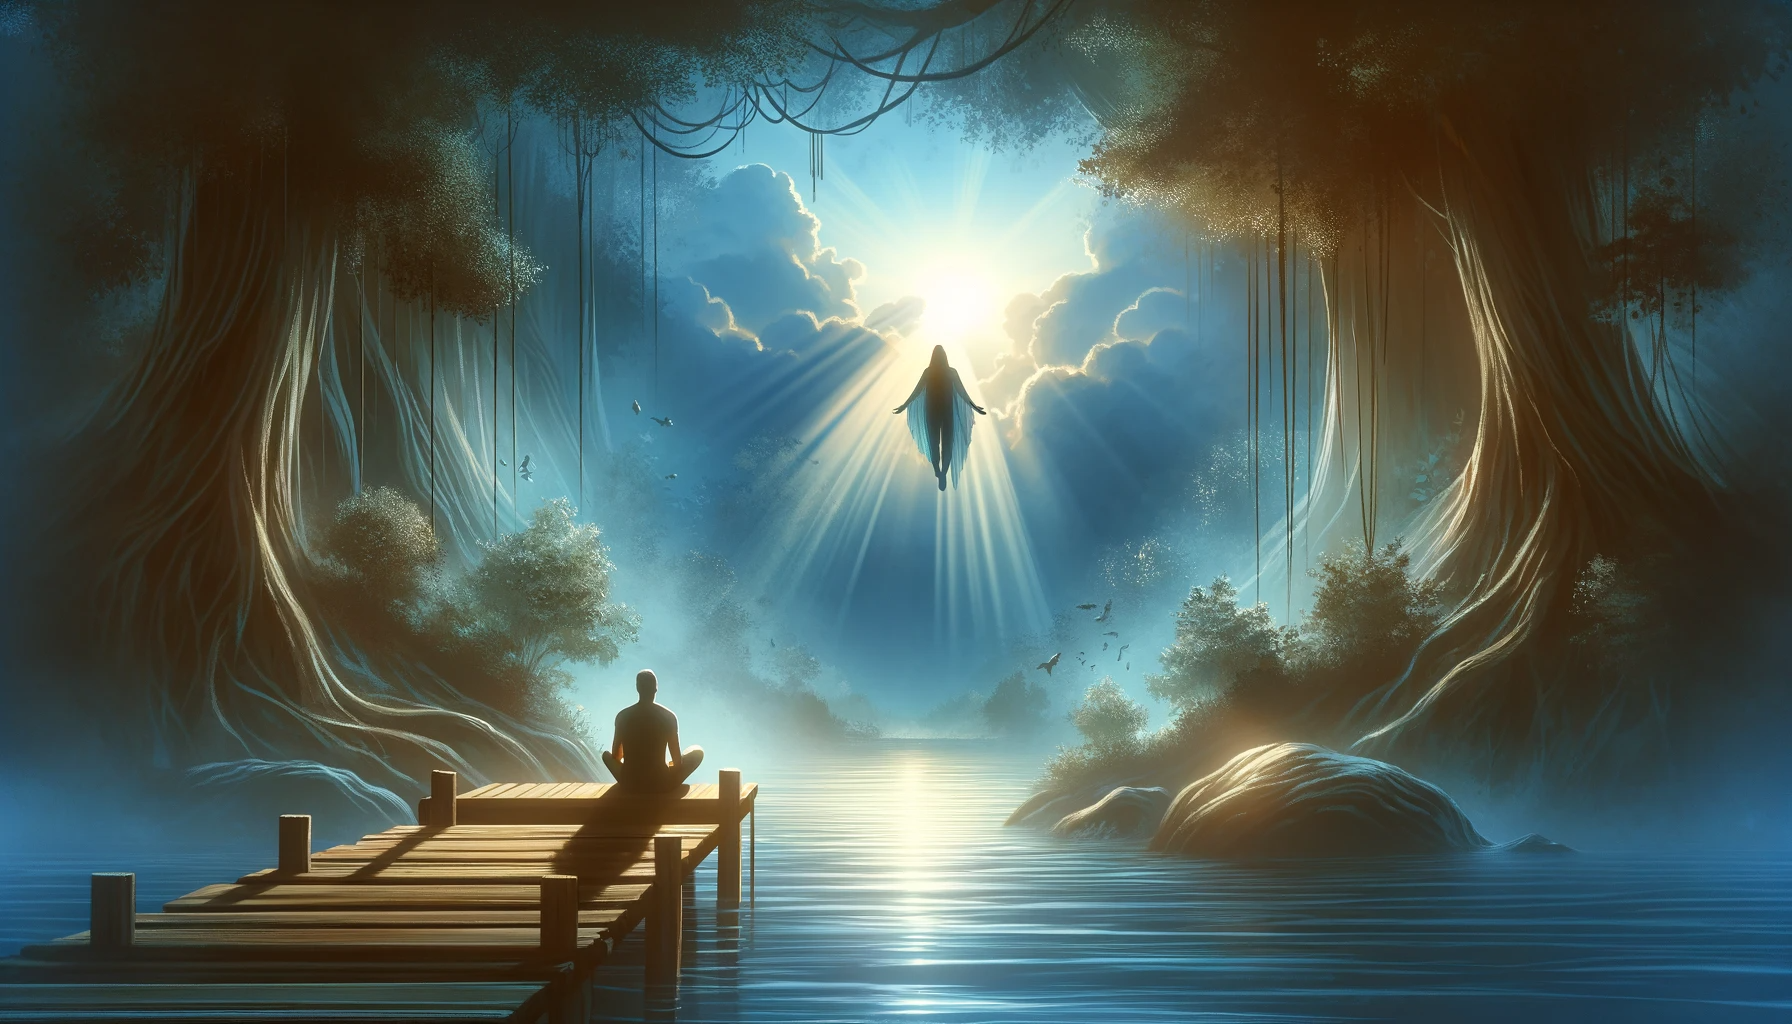 An image that illustrates the theme of overcoming fear through faith in a Higher Power. The scene should depict a calming and reassuring environment,